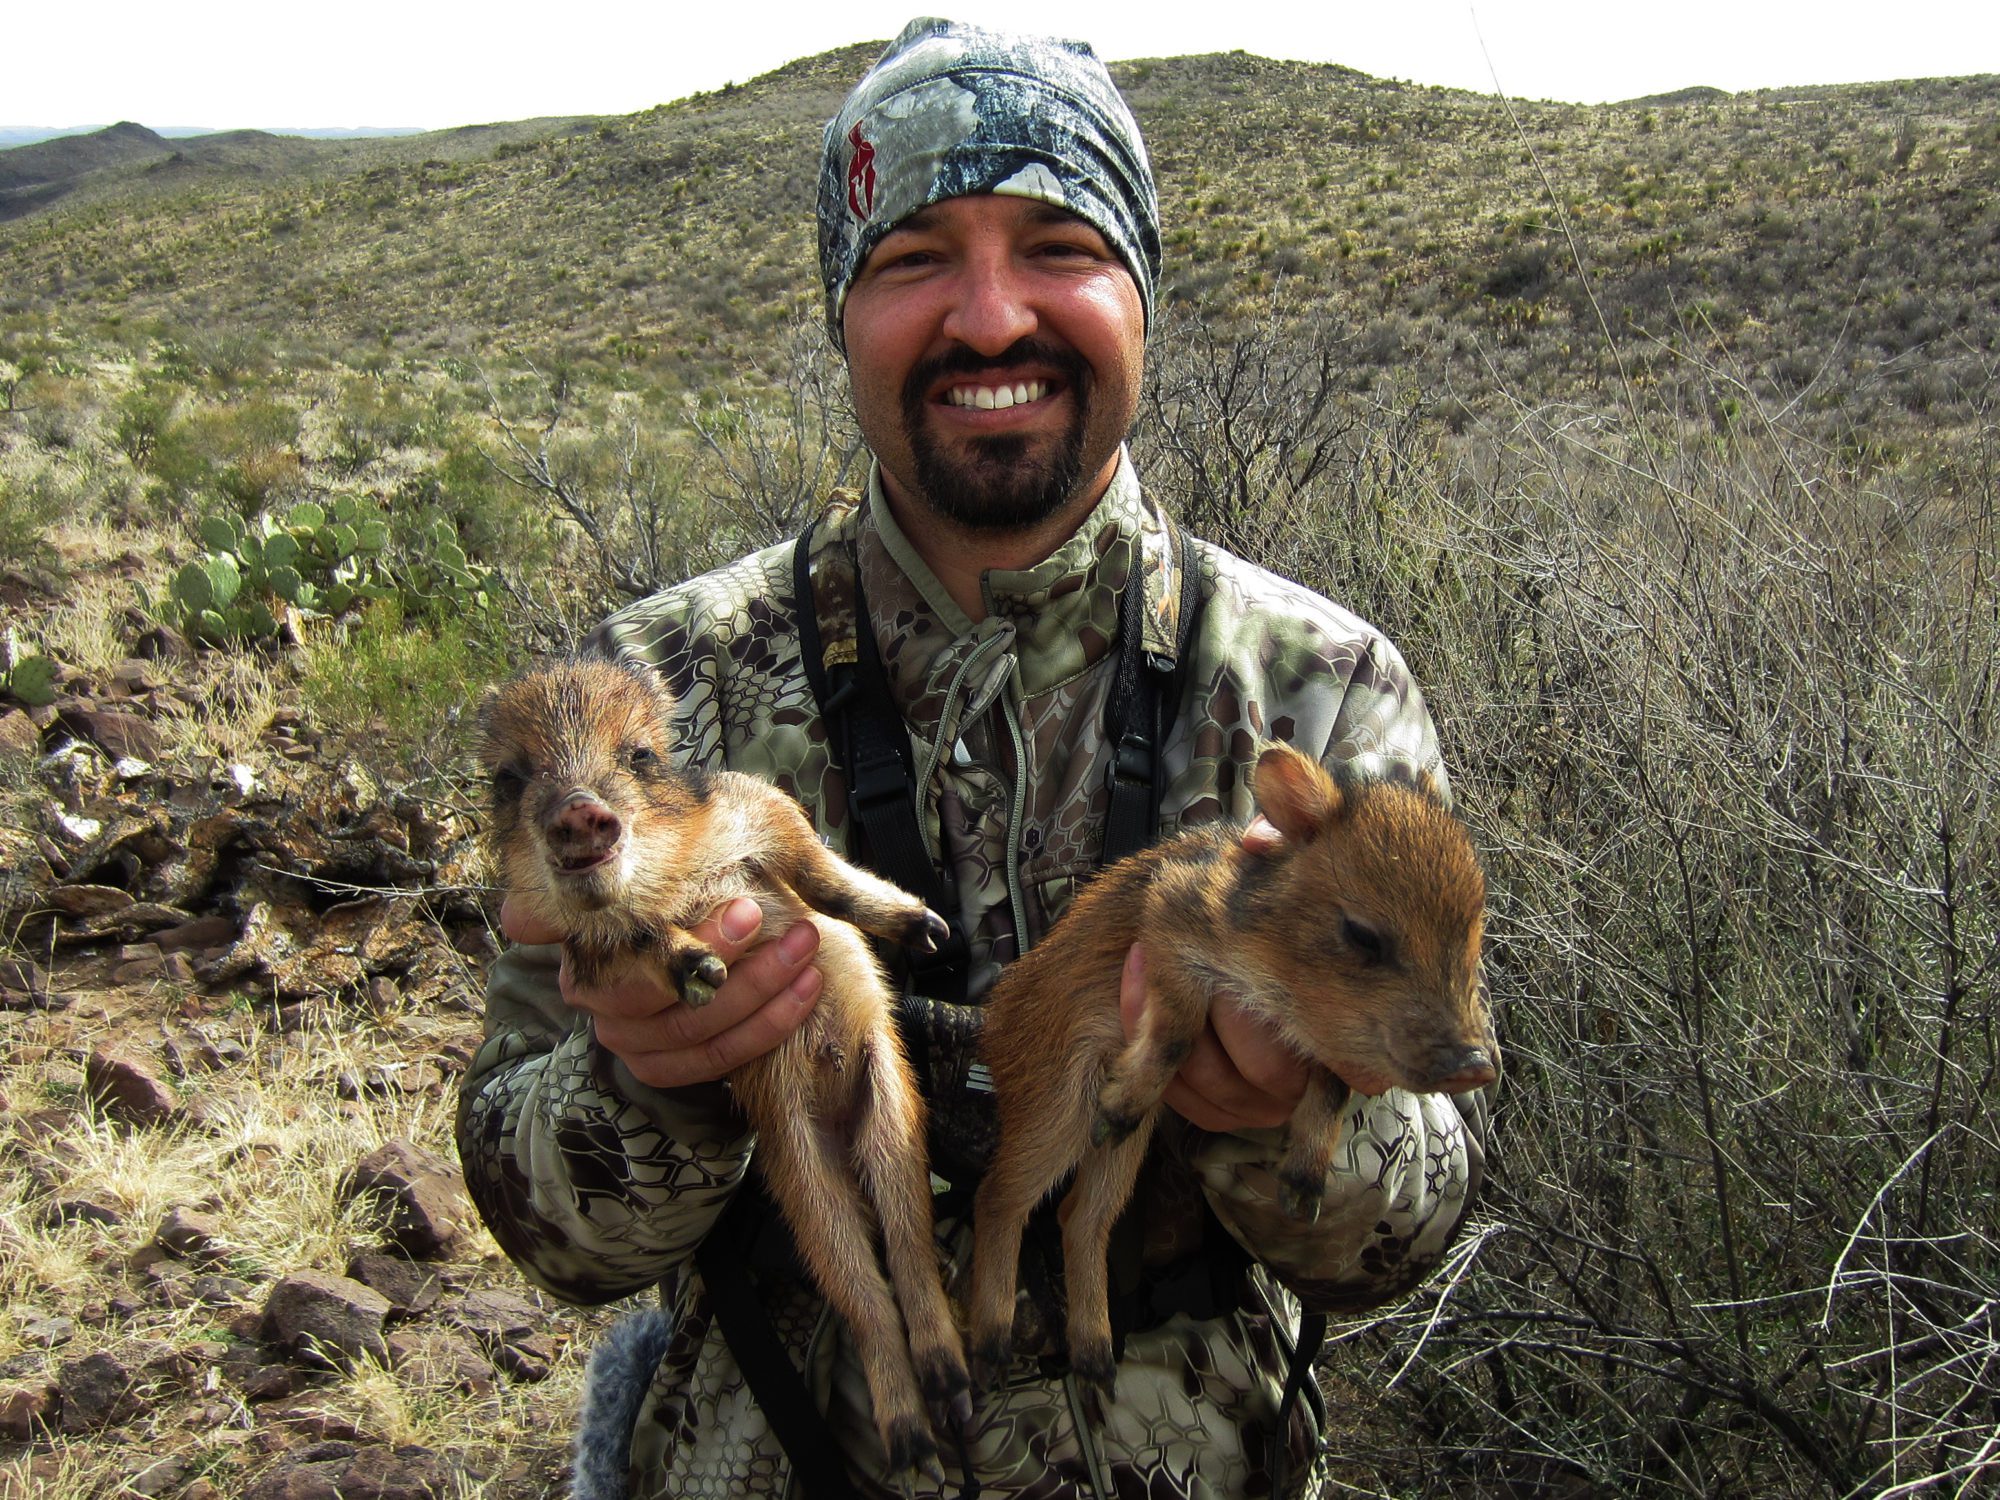 While they were taking pictures, Cory was able to catch these two baby javelina. They were feisty little buggers... and cute. They took a few pics of them and turned them loose.